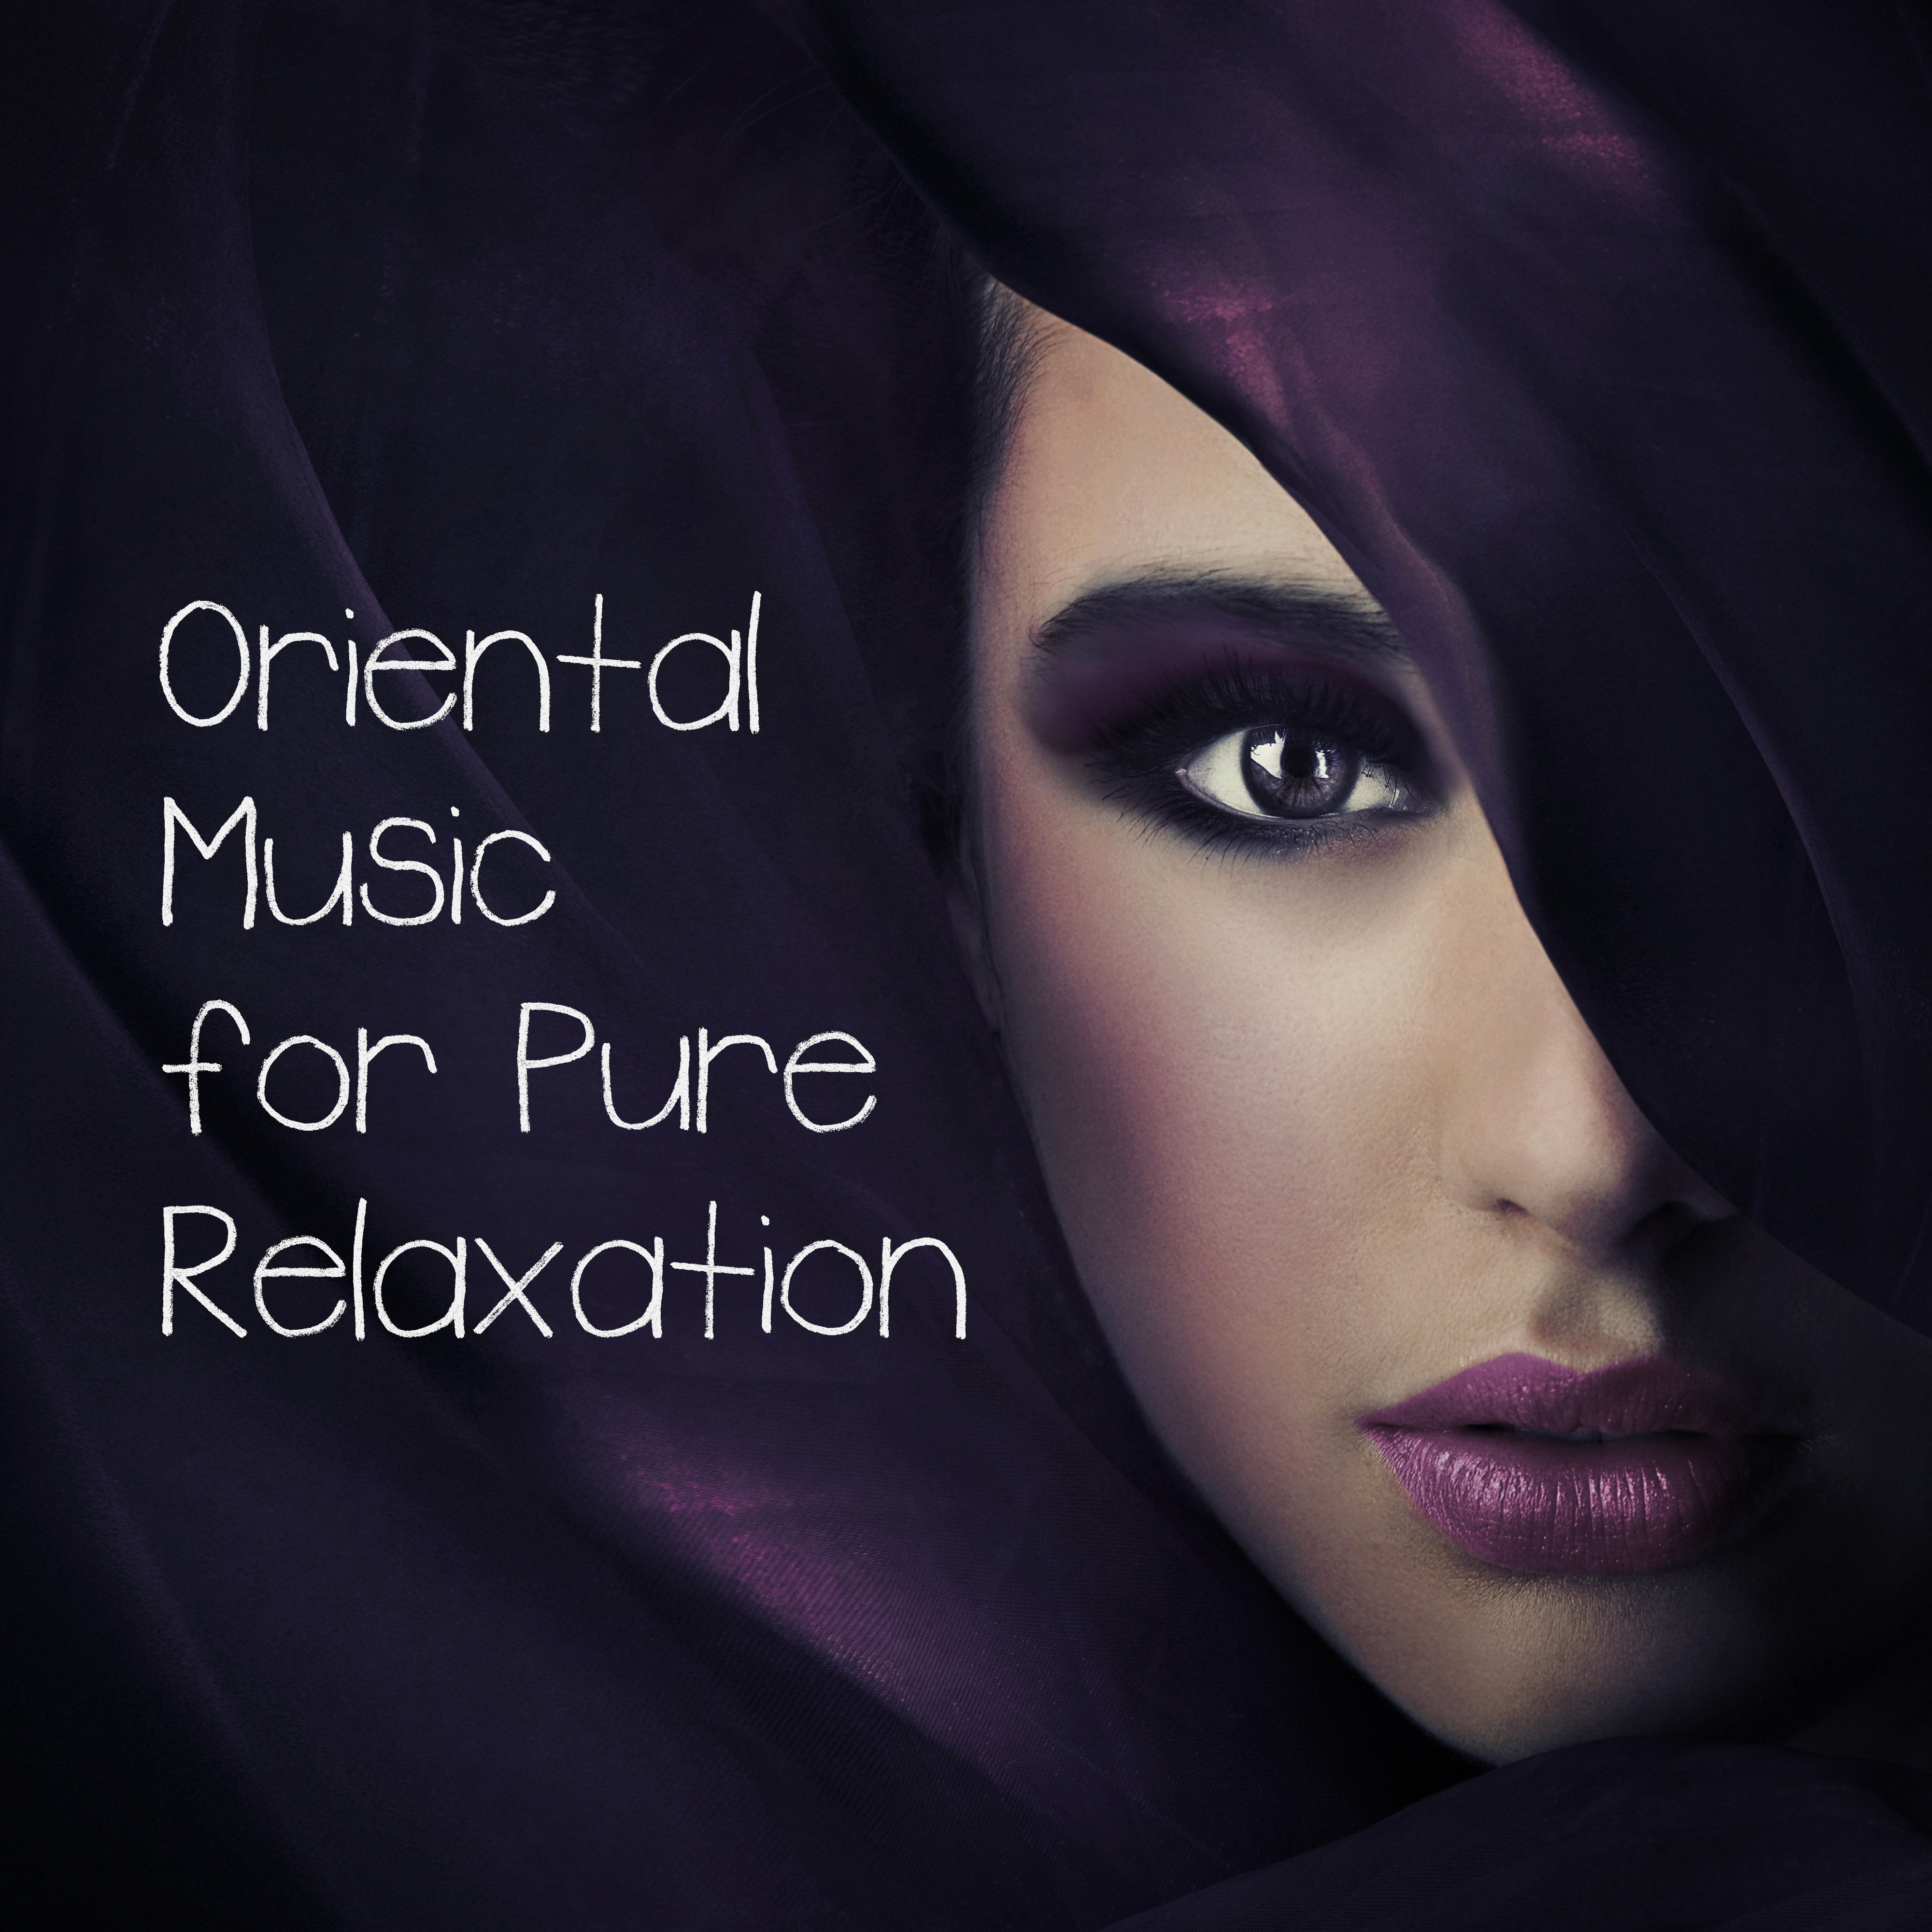 Oriental Music for Pure Relaxation – Chillout 2019, Relaxing Tunes for Tantric Massage, Yoga, Deep Meditation, Zen Lounge, Oriental Chillout